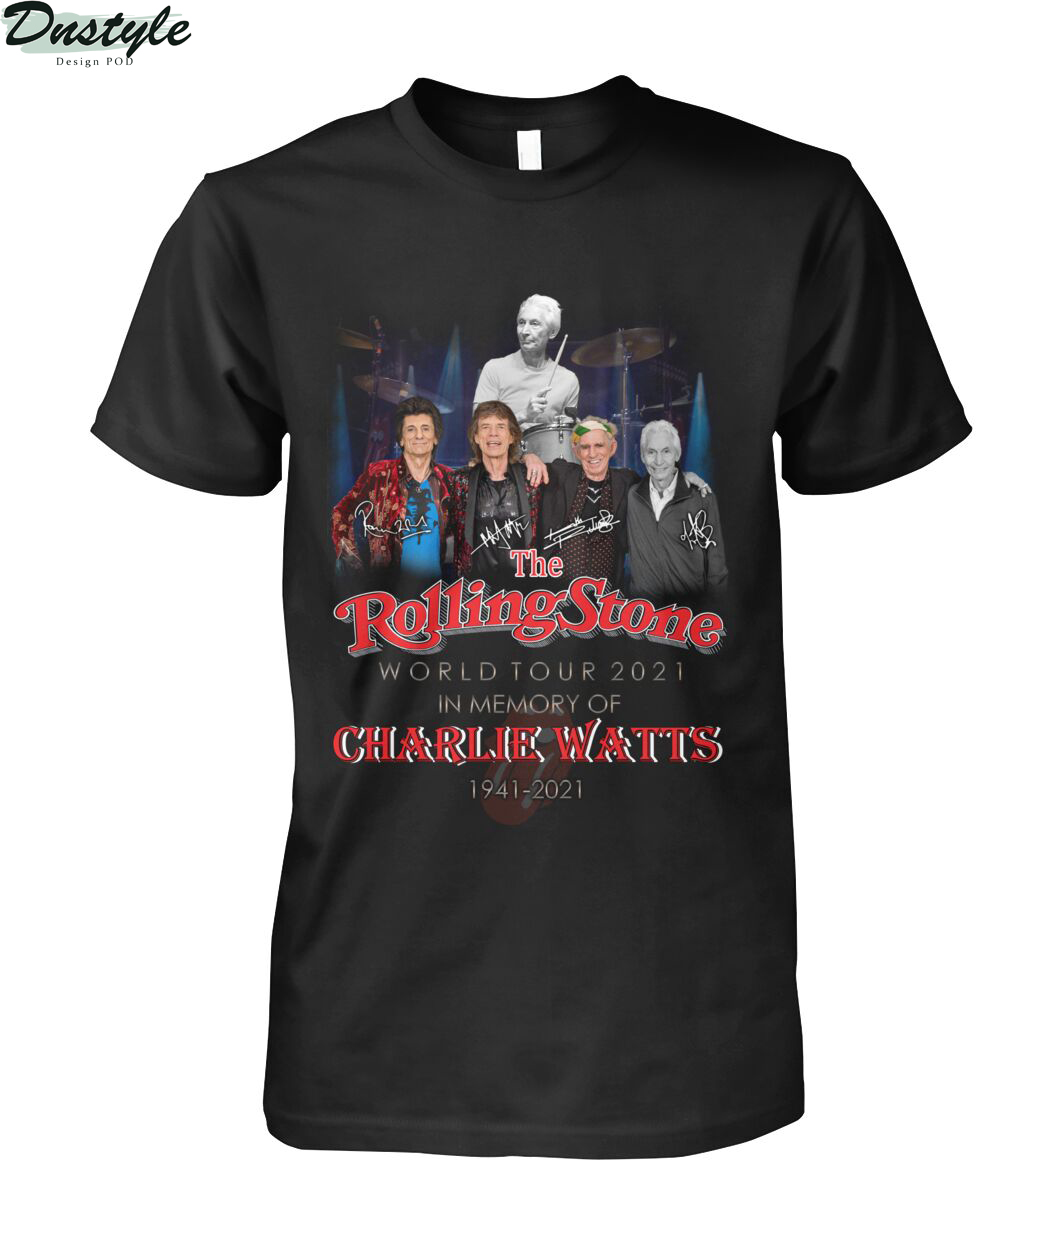 The rolling stone world tour 2021 in memory of Charlie Watts 1941-2021 shirt